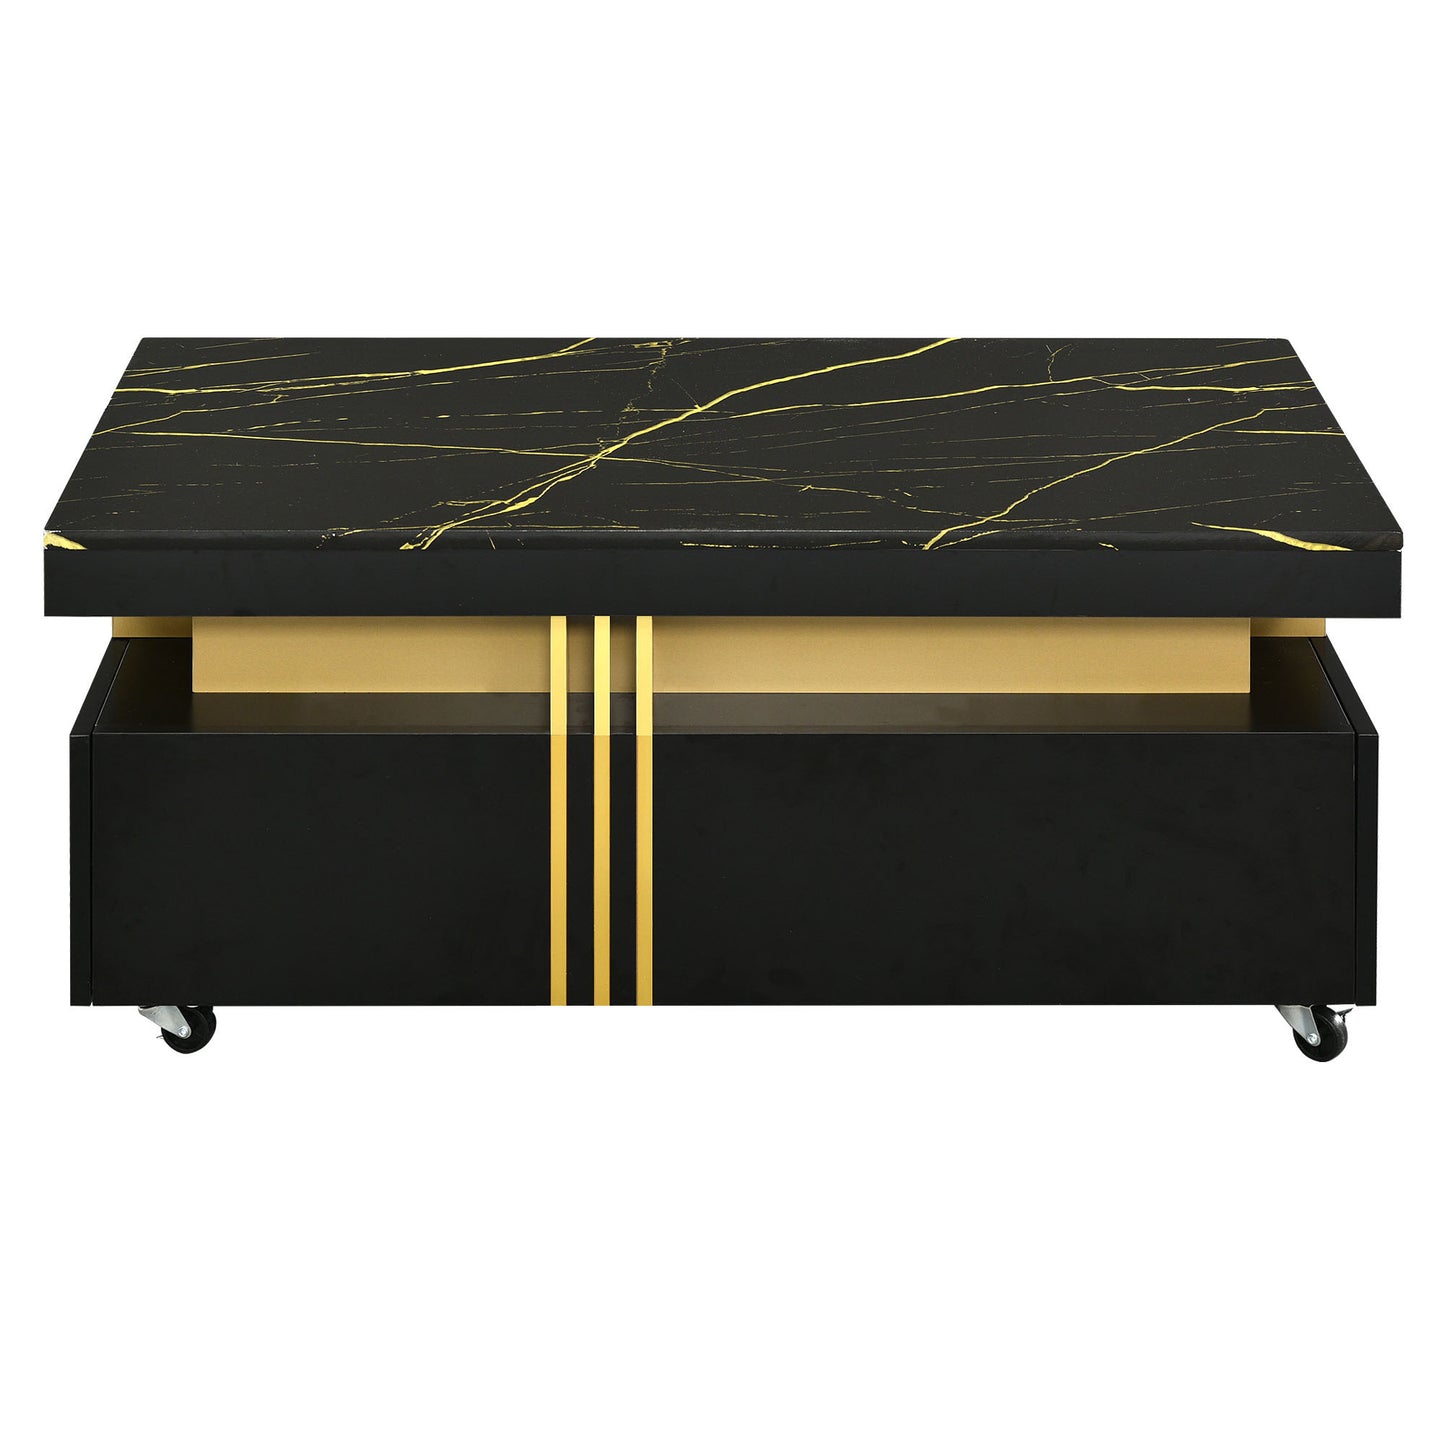 [VIDEO provided] ON-TREND Contemporary Coffee Table with Faux Marble Top, Rectangle Cocktail Table with Caster Wheels, Moderate Luxury Center Table with Gold Metal Bars for Living Room, Black